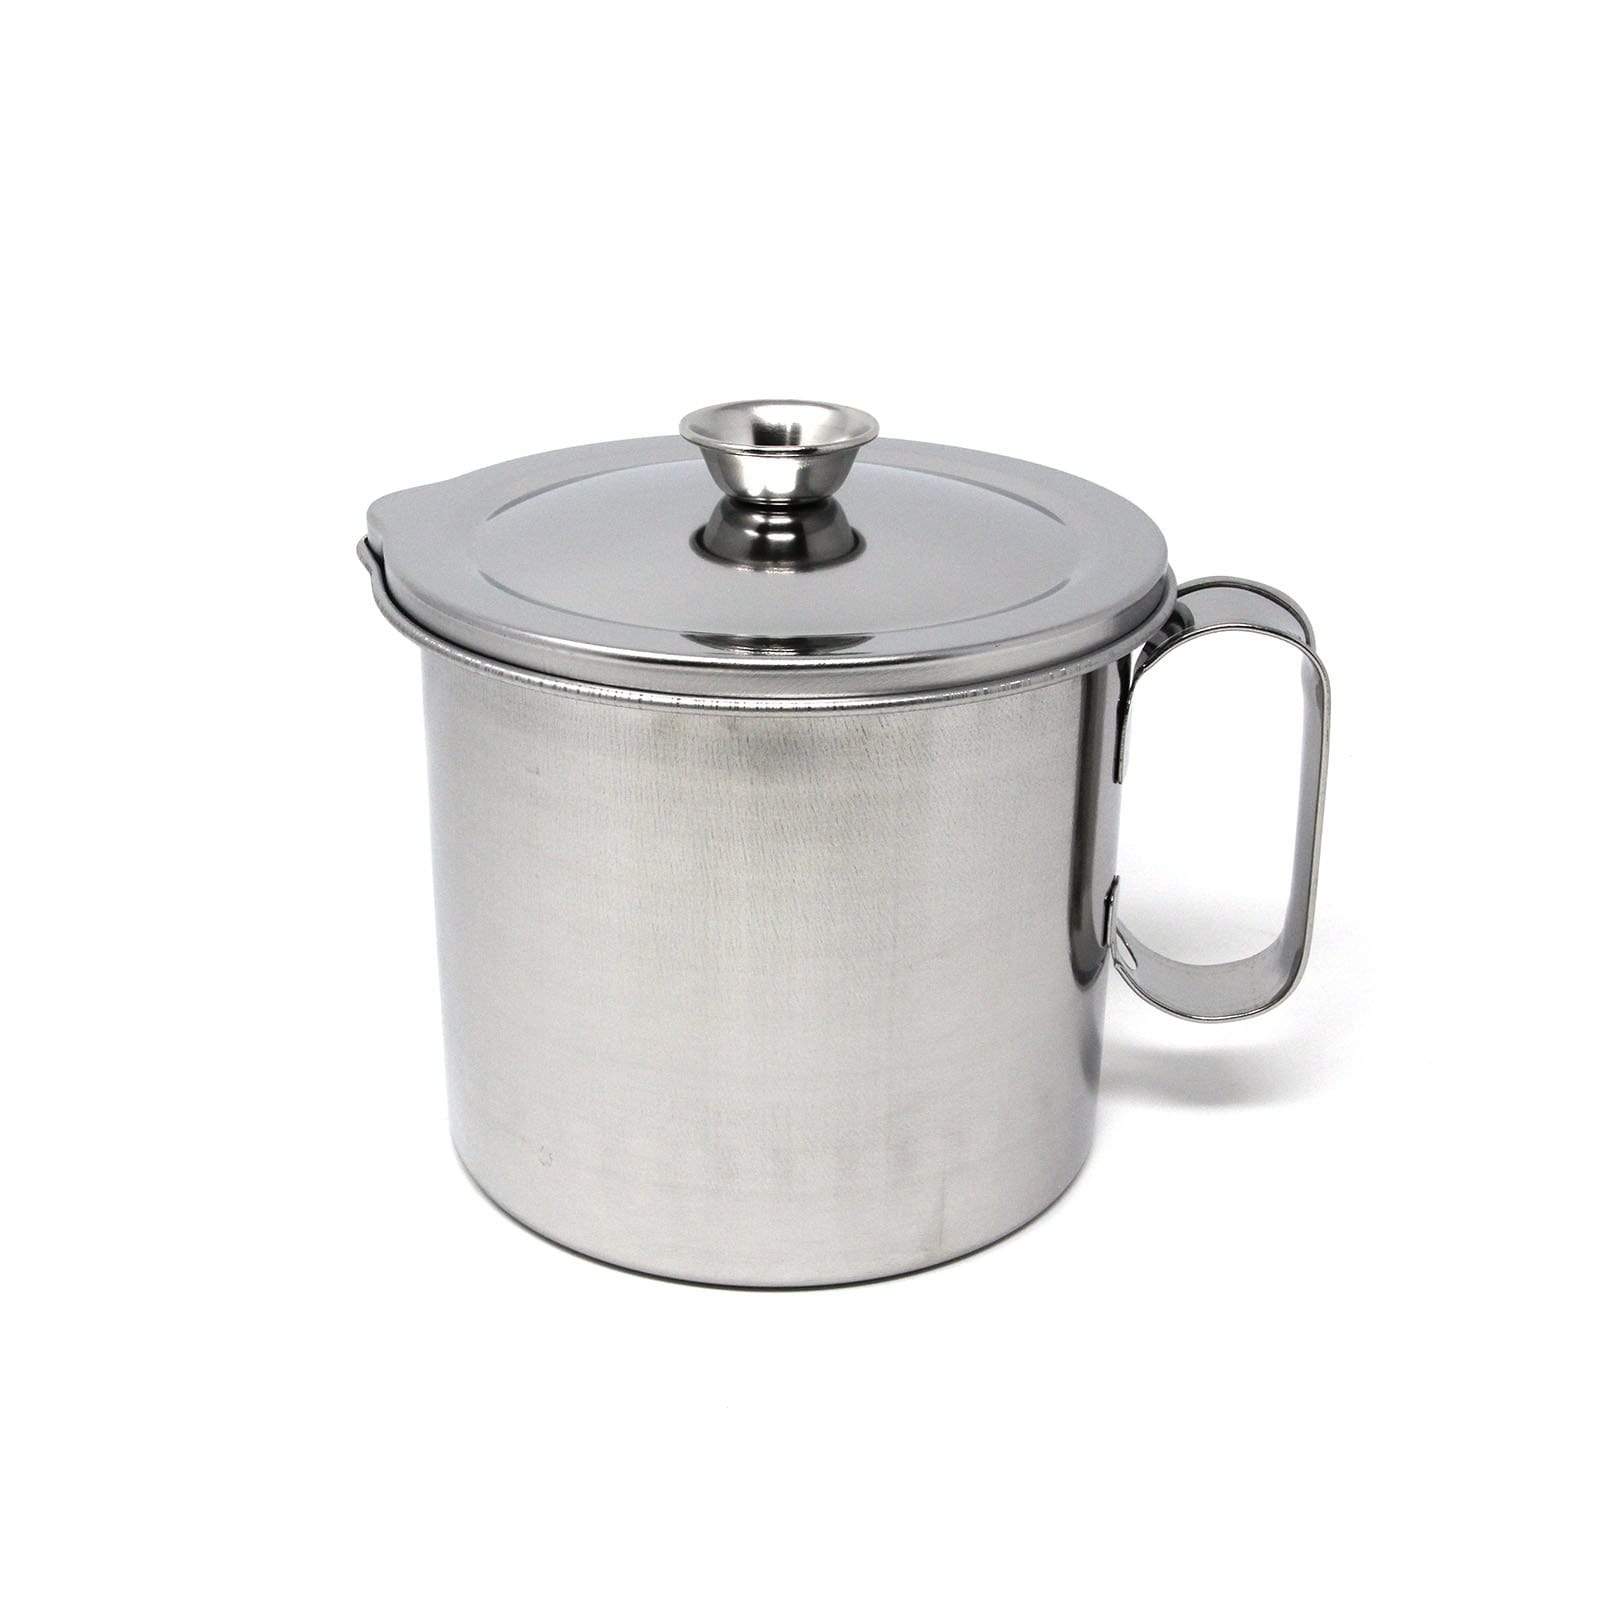 https://www.globalkitchenjapan.com/cdn/shop/products/ichibishi-stainless-steel-cooking-oil-keeper-with-double-filter-strainer-1-2l-oil-storage-containers-6926290976851_1600x.jpg?v=1564104942